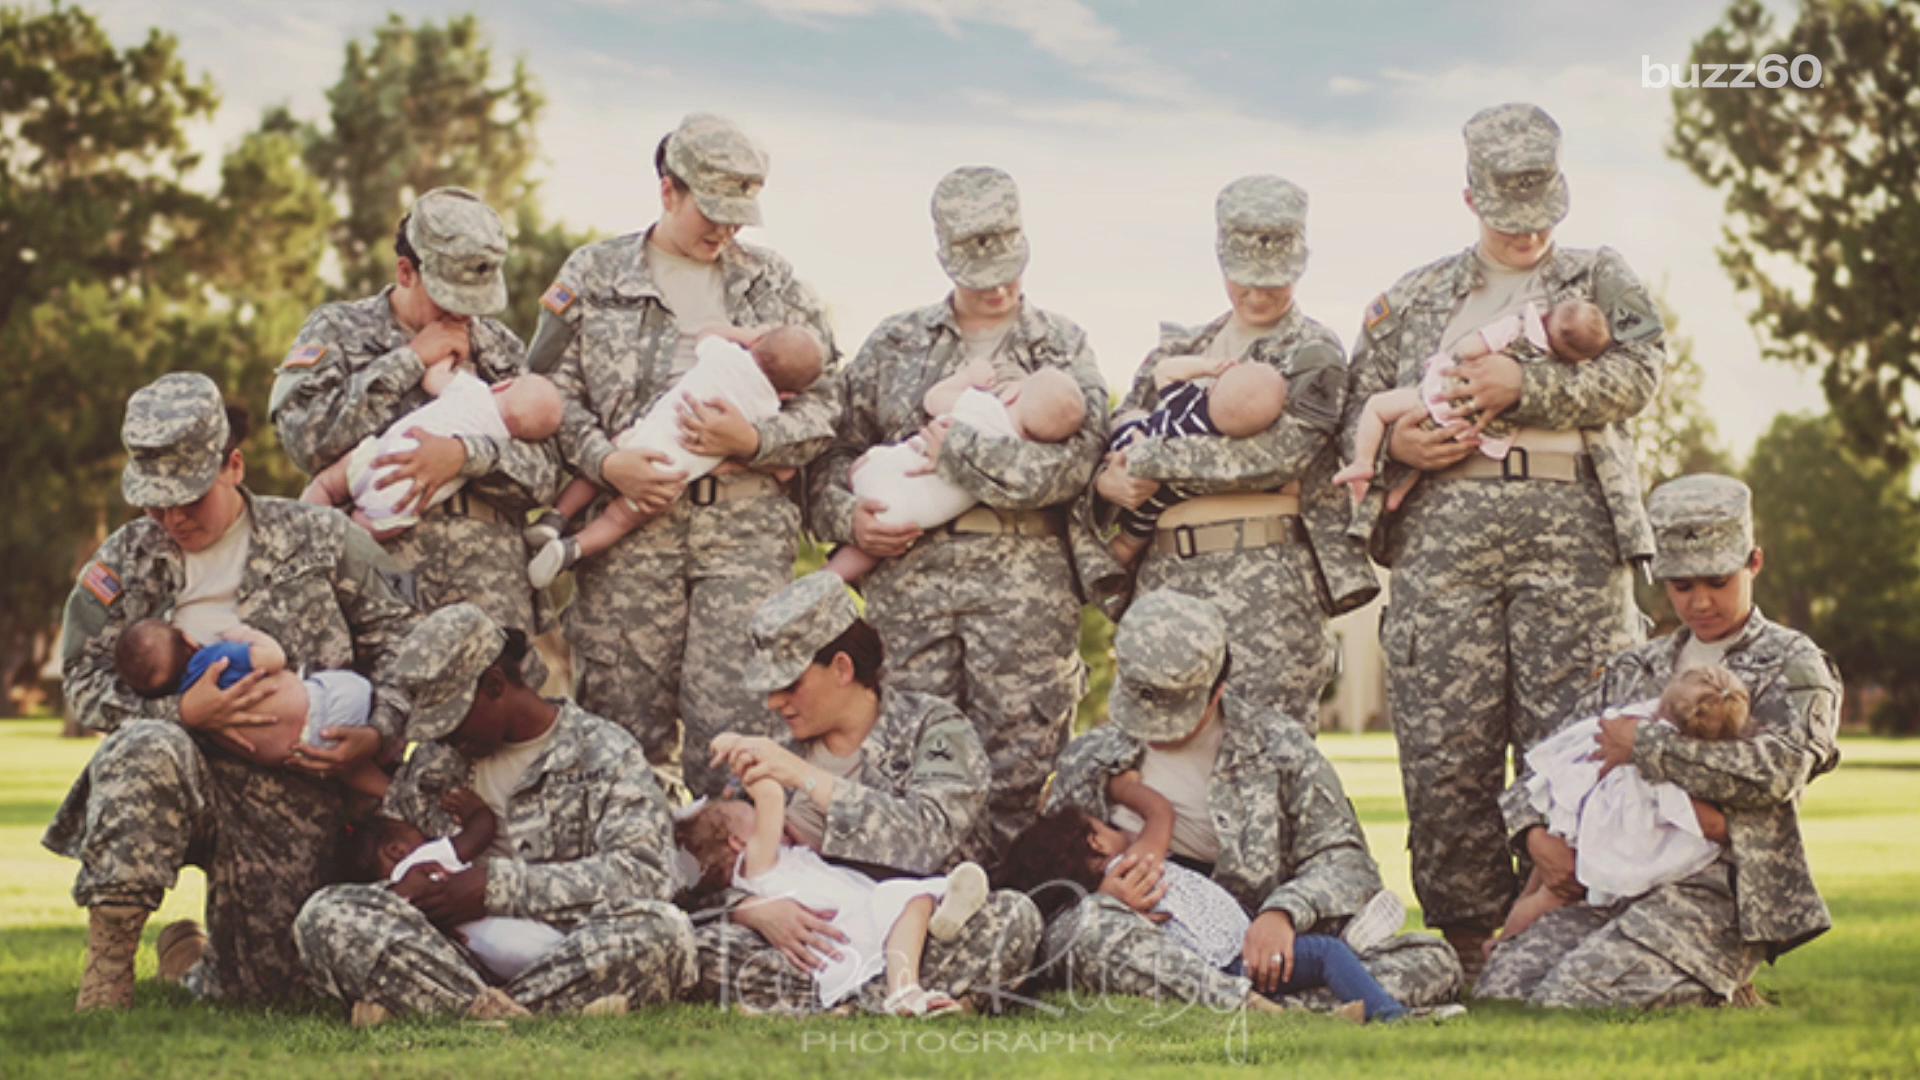 Photo of military moms breastfeeding in uniform goes viral